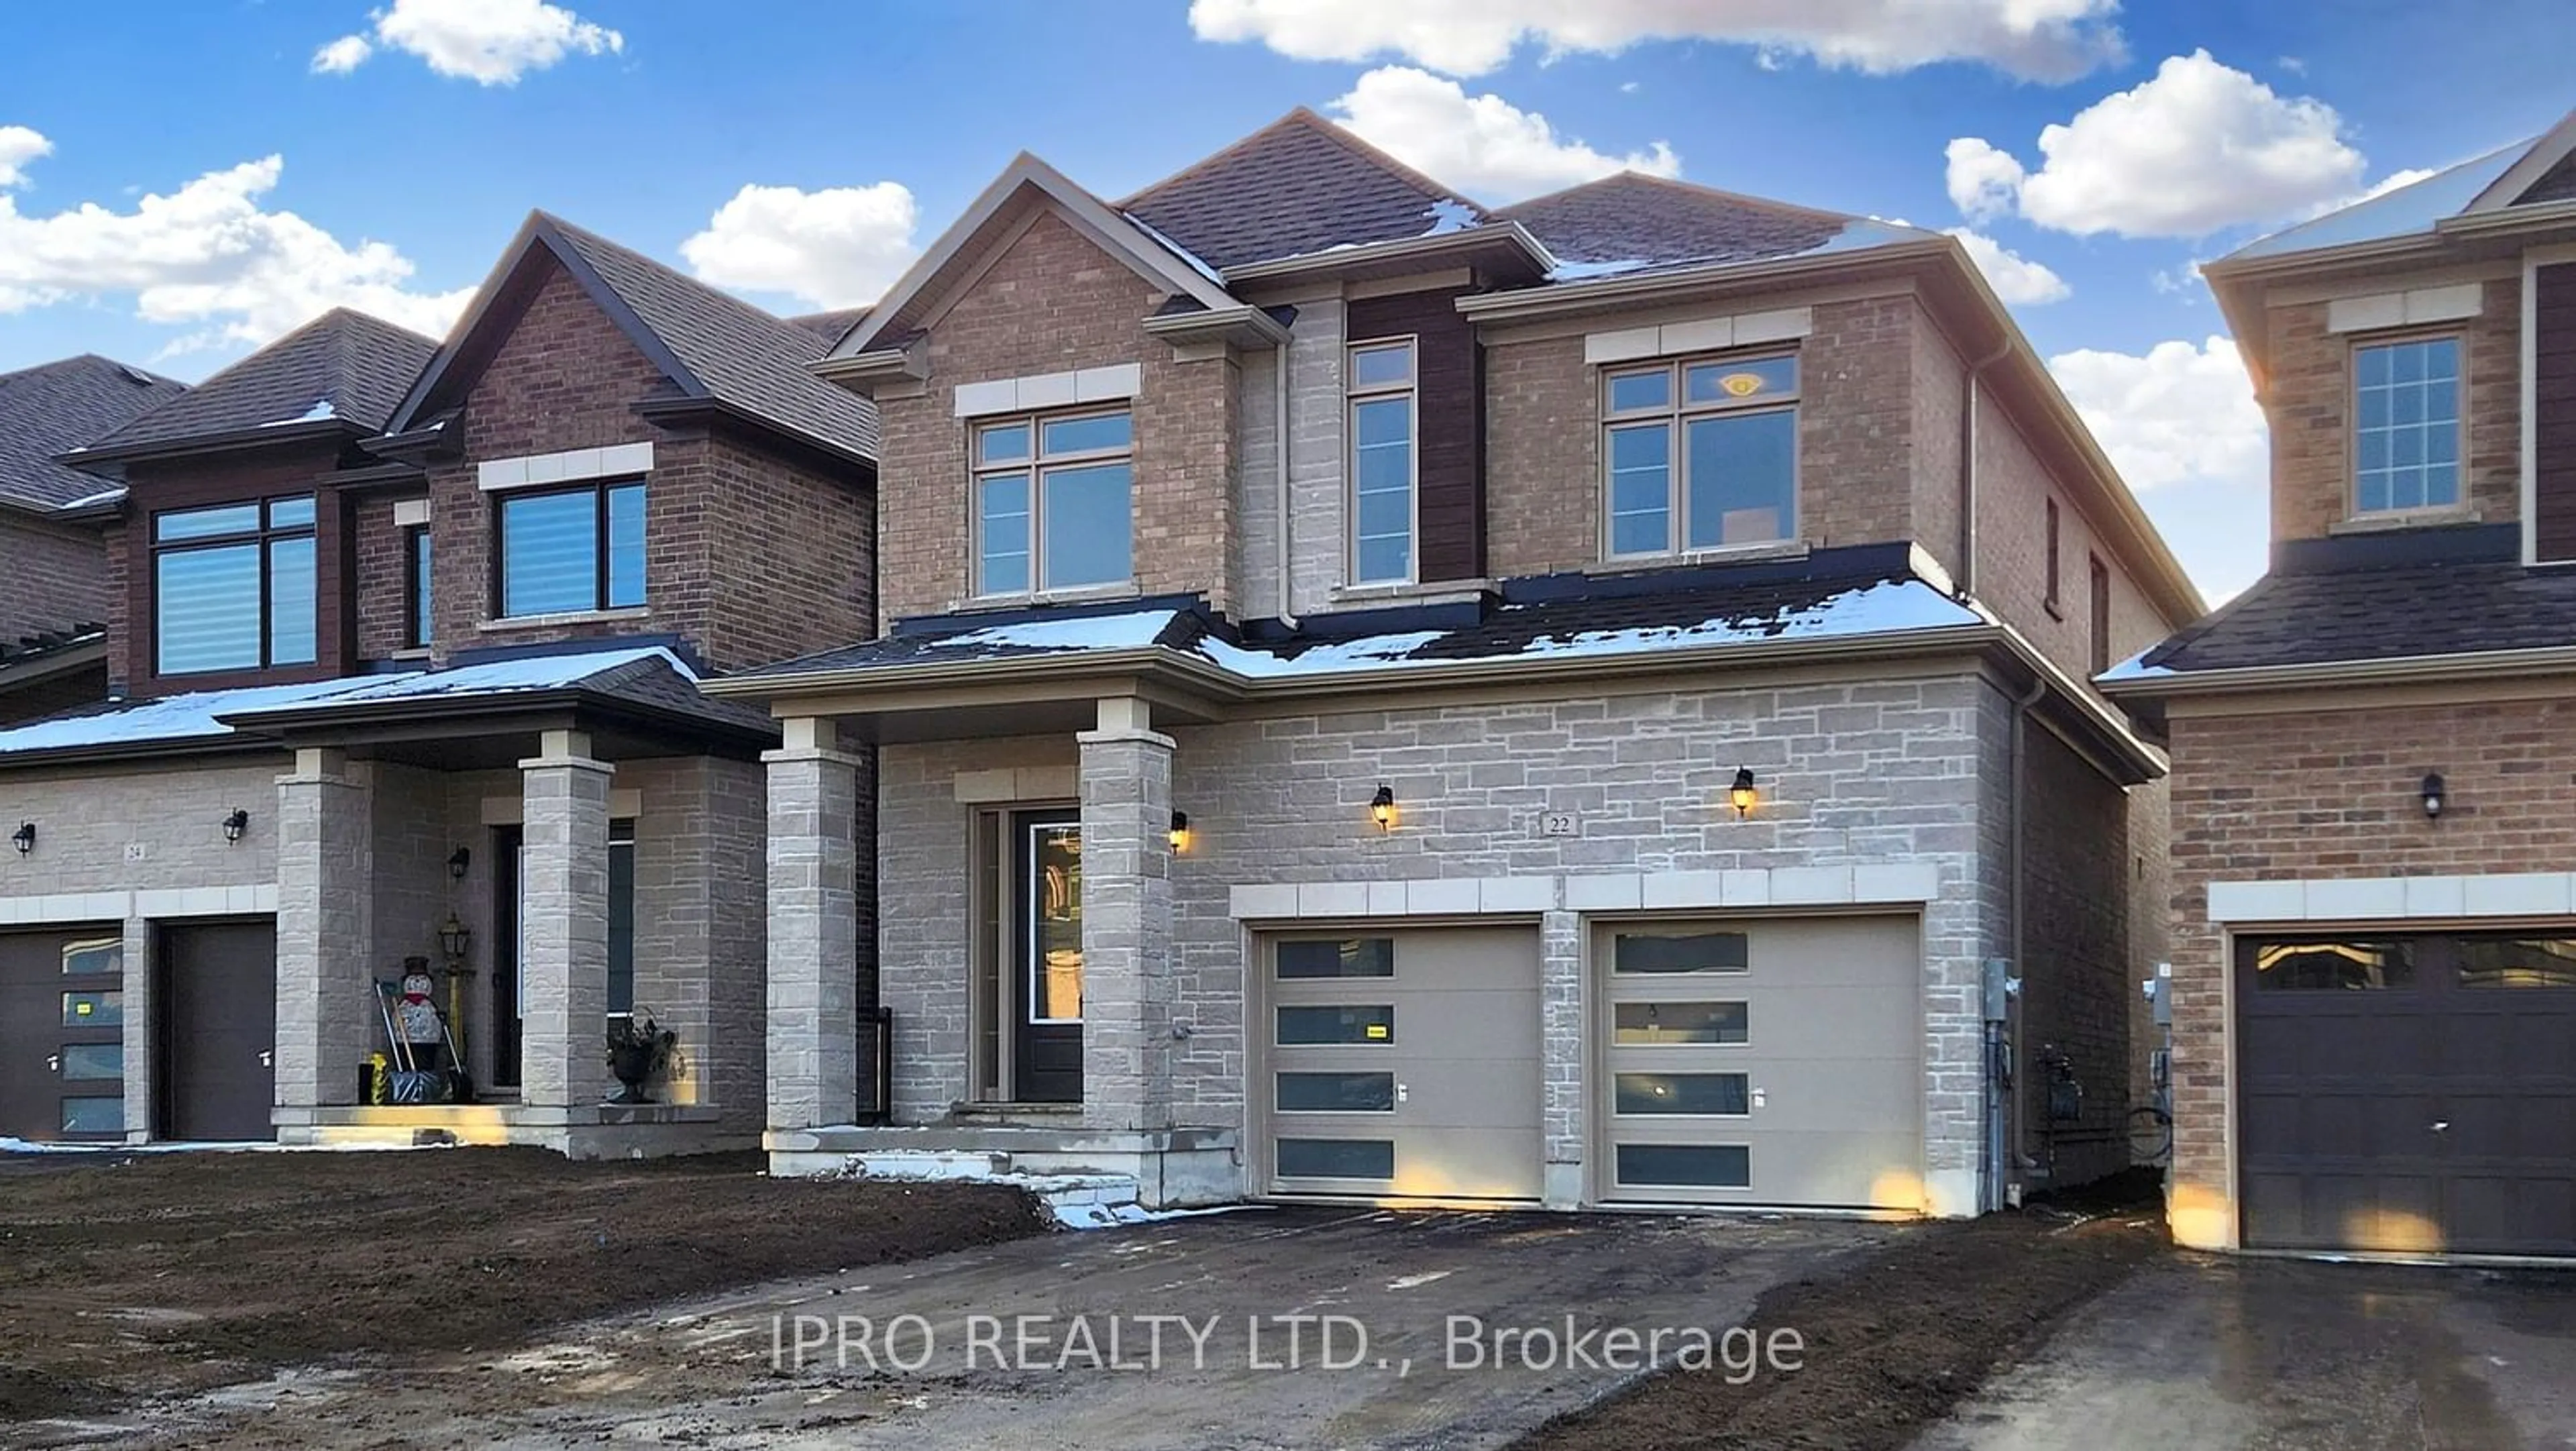 Home with brick exterior material for 22 Sassafrass Rd, Springwater Ontario L9X 2C6